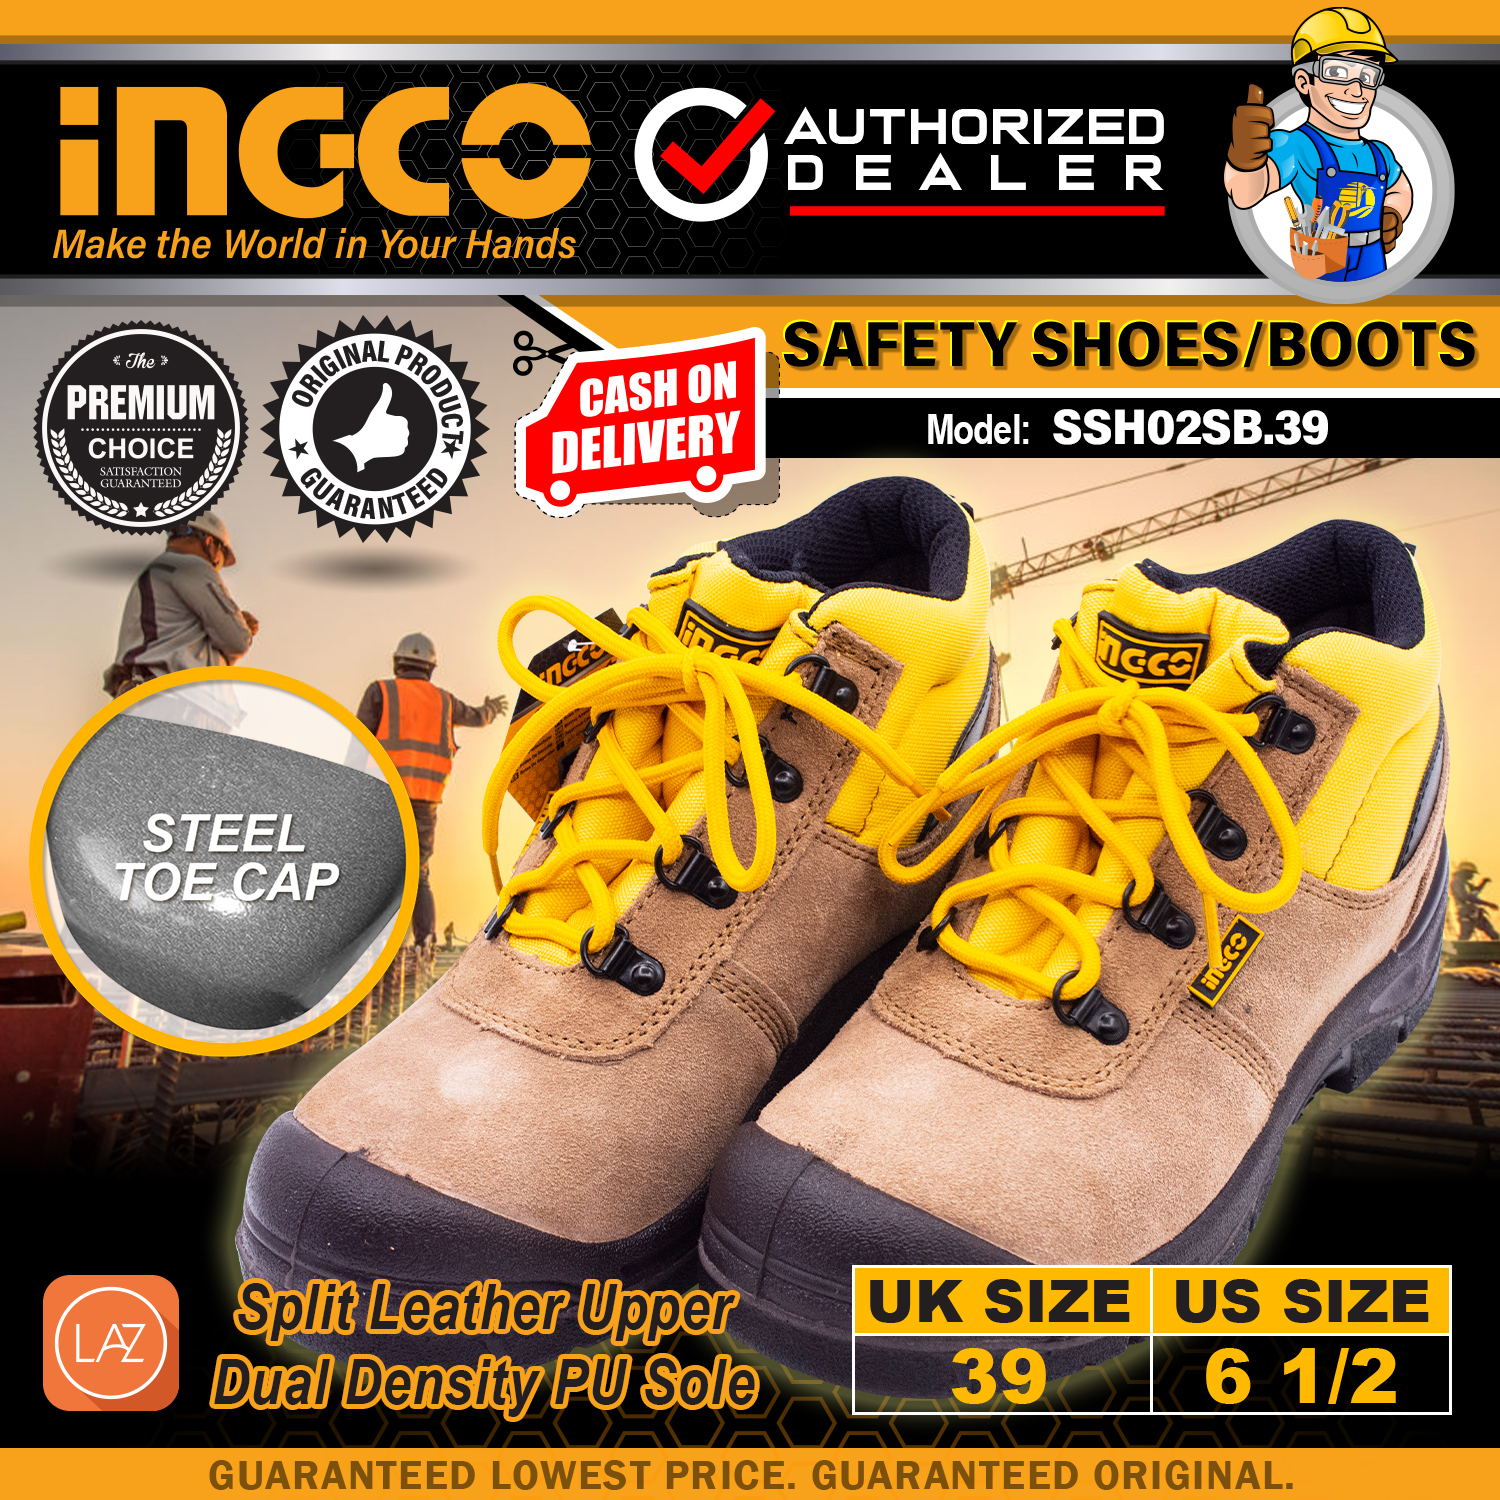 INGCO Safety Boots/Safety Shoes: Buy 